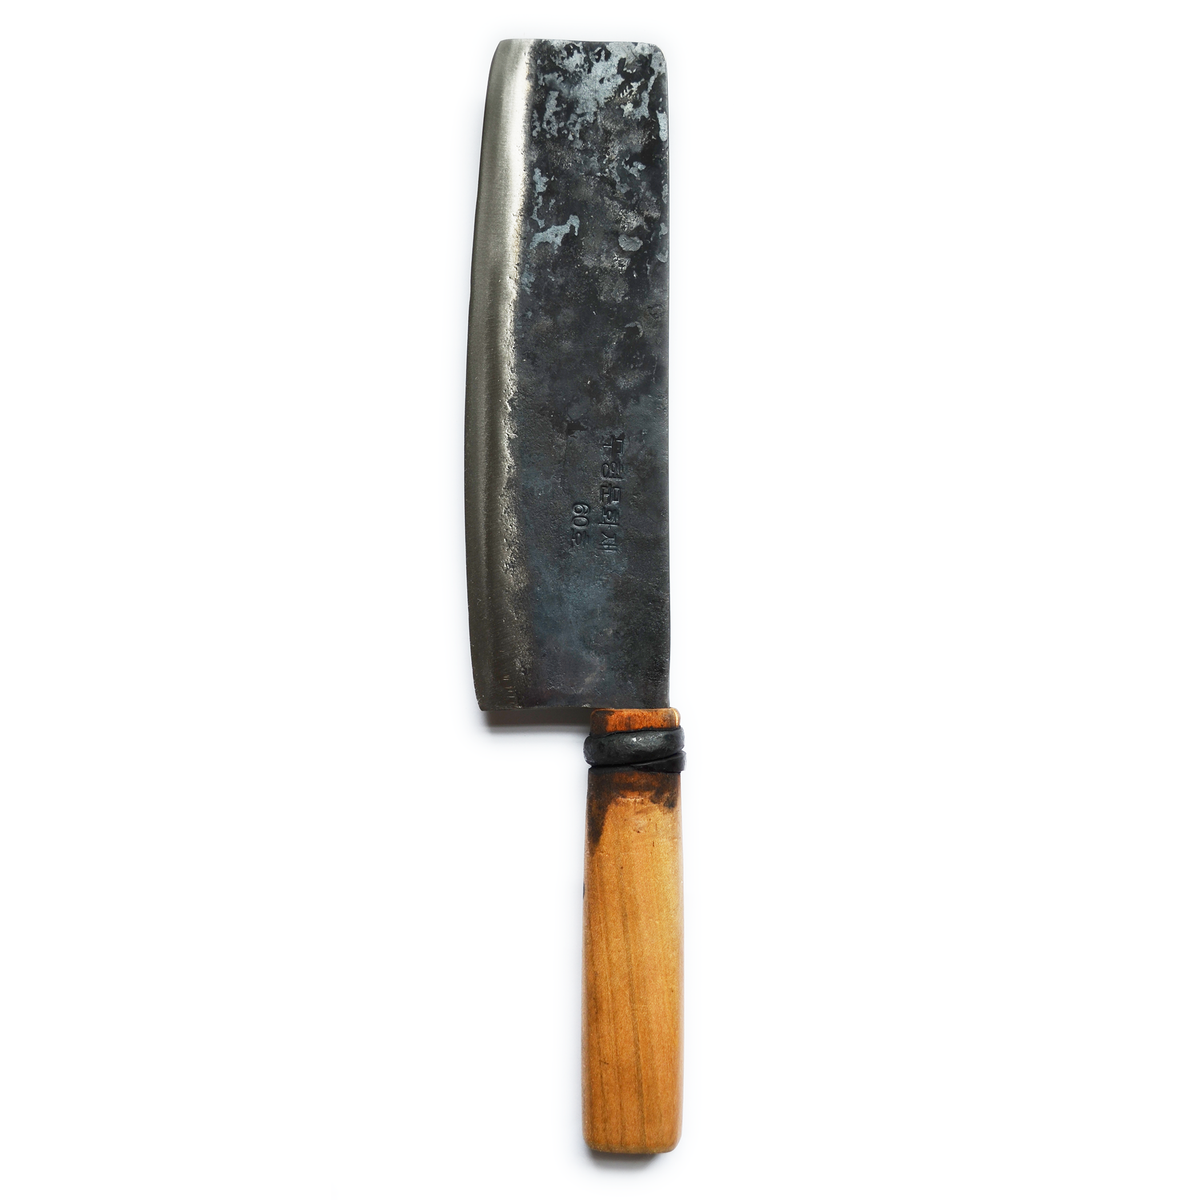 https://cdn.shopify.com/s/files/1/0832/9301/products/Large_Vegetable_knife_web_72e5ec31-c124-44b5-b2b1-75e7b5cf1dda_1200x.png?v=1615387272